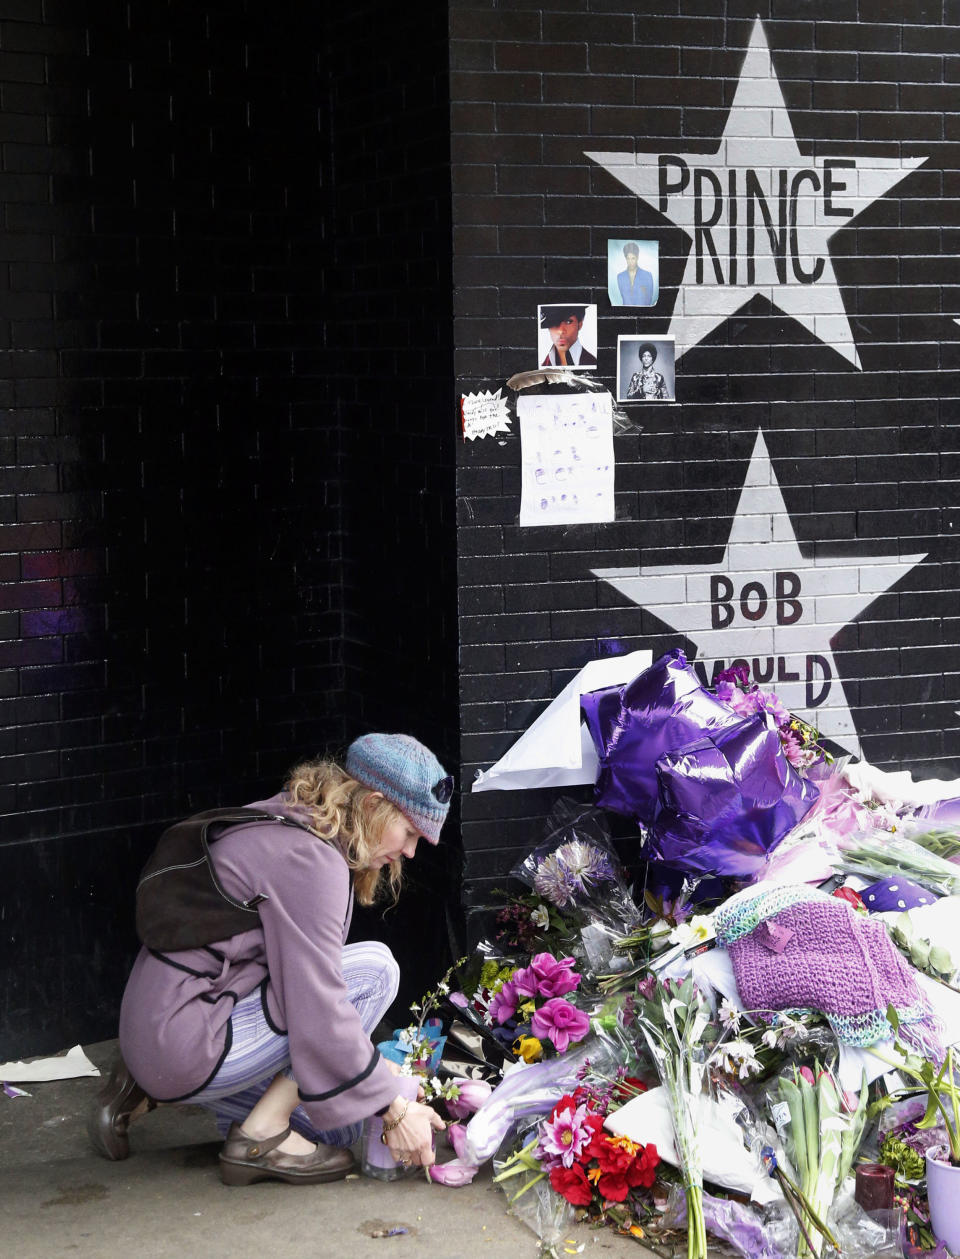 FILE - In this April 22, 2016, file photo, a woman places flowers at a memorial at First Avenue in Minneapolis where pop super star Prince often performed. The one-year anniversary of Prince's death from an overdose will be marked April 21. (AP Photo/Jim Mone, File)